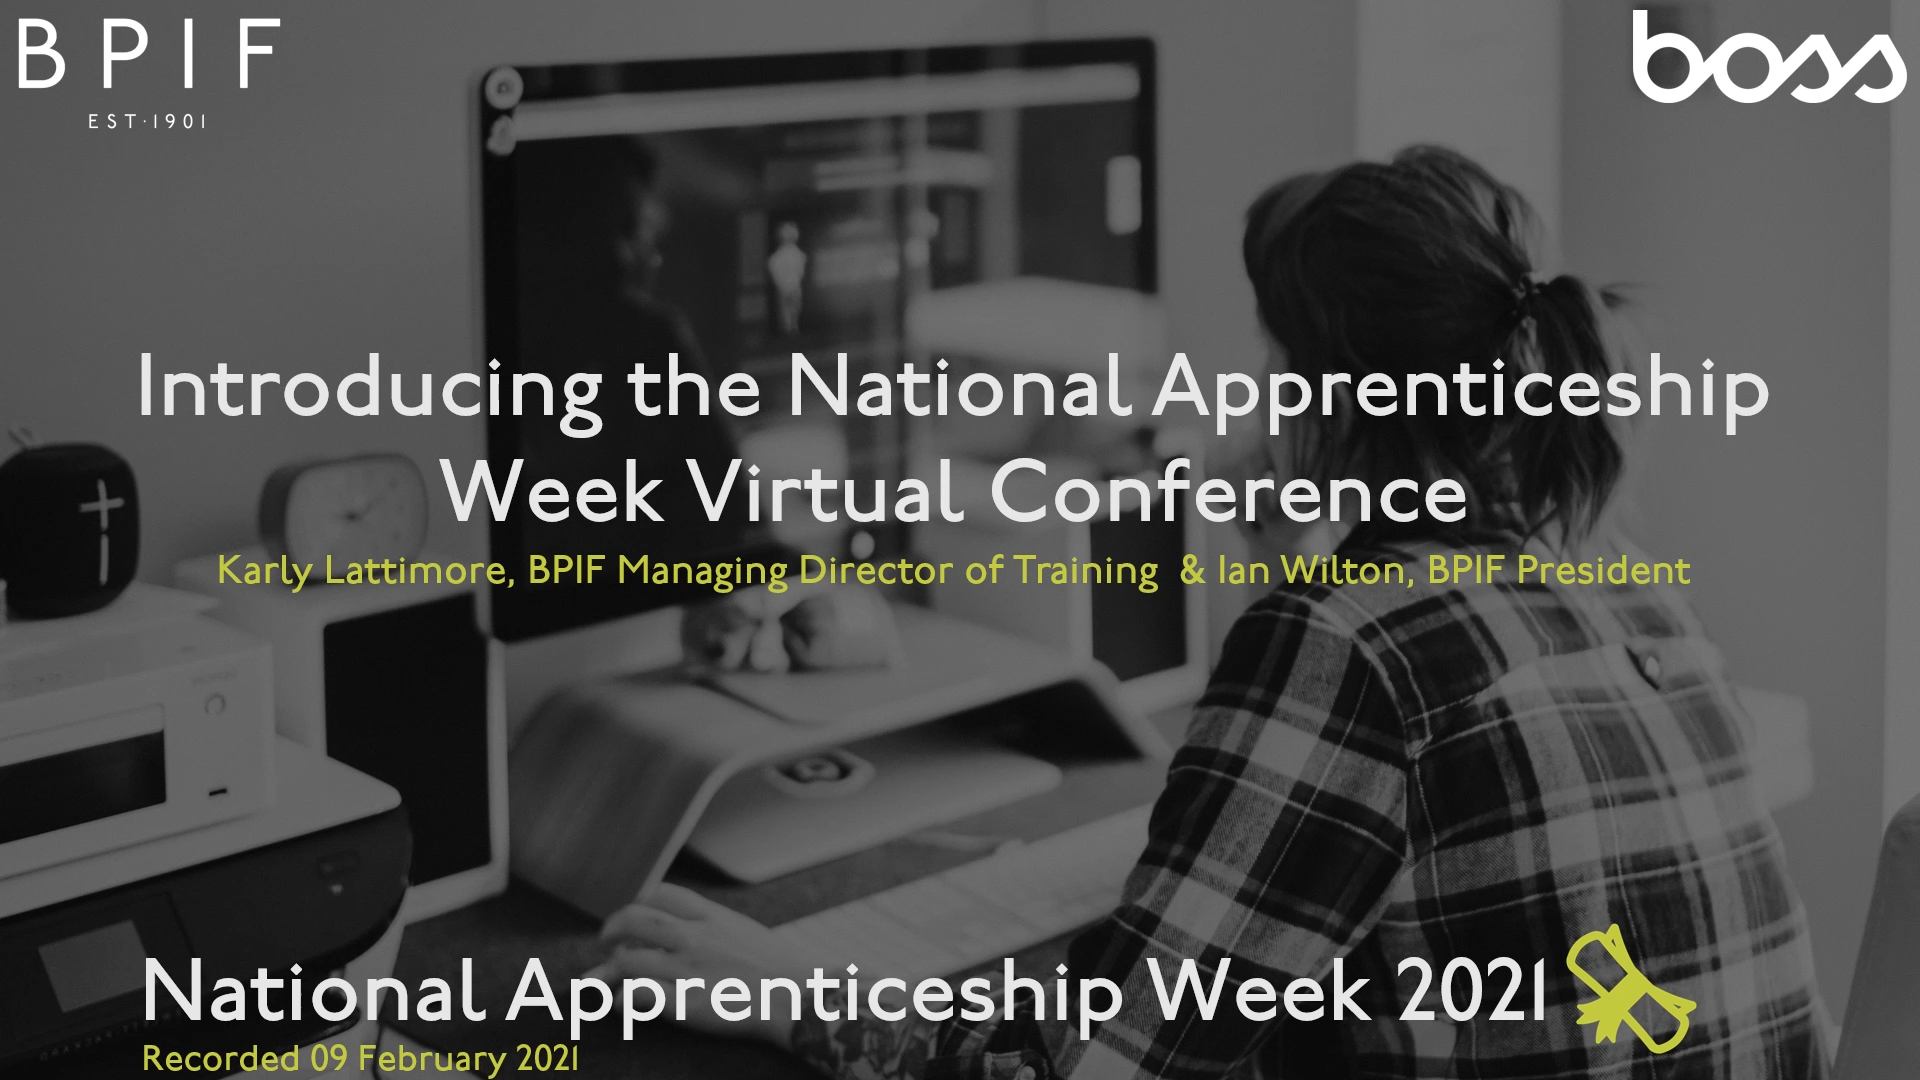 An Introduction to National Apprenticeship Week 2021